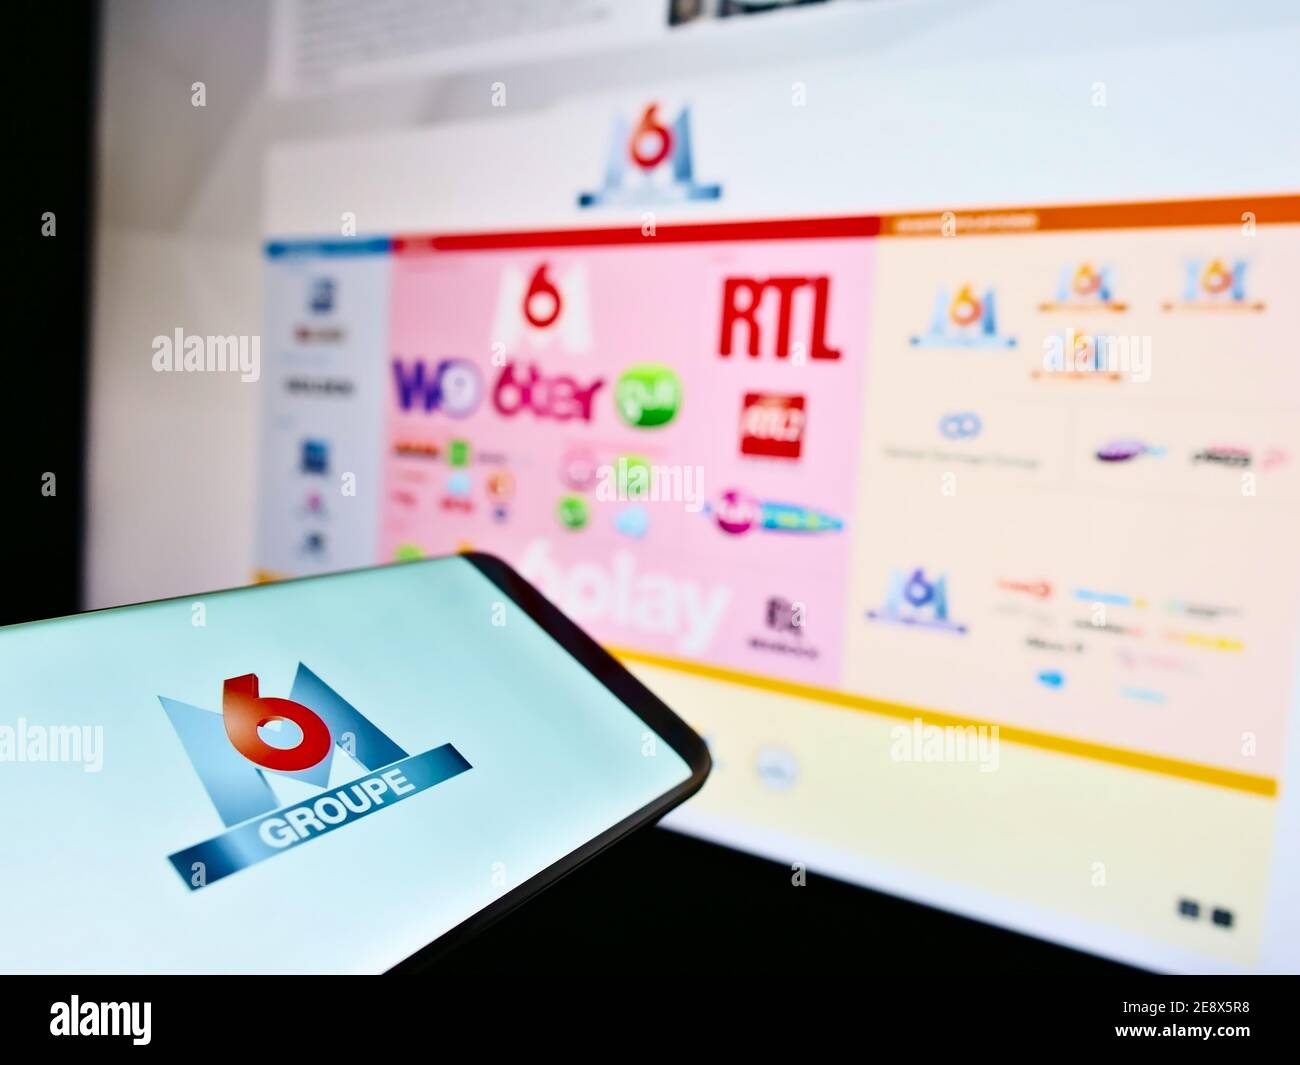 Smartphone with logo of French media holding company Metropole Télévision S.A. (Groupe M6) on display with website. Focus on center of phone screen. Stock Photo